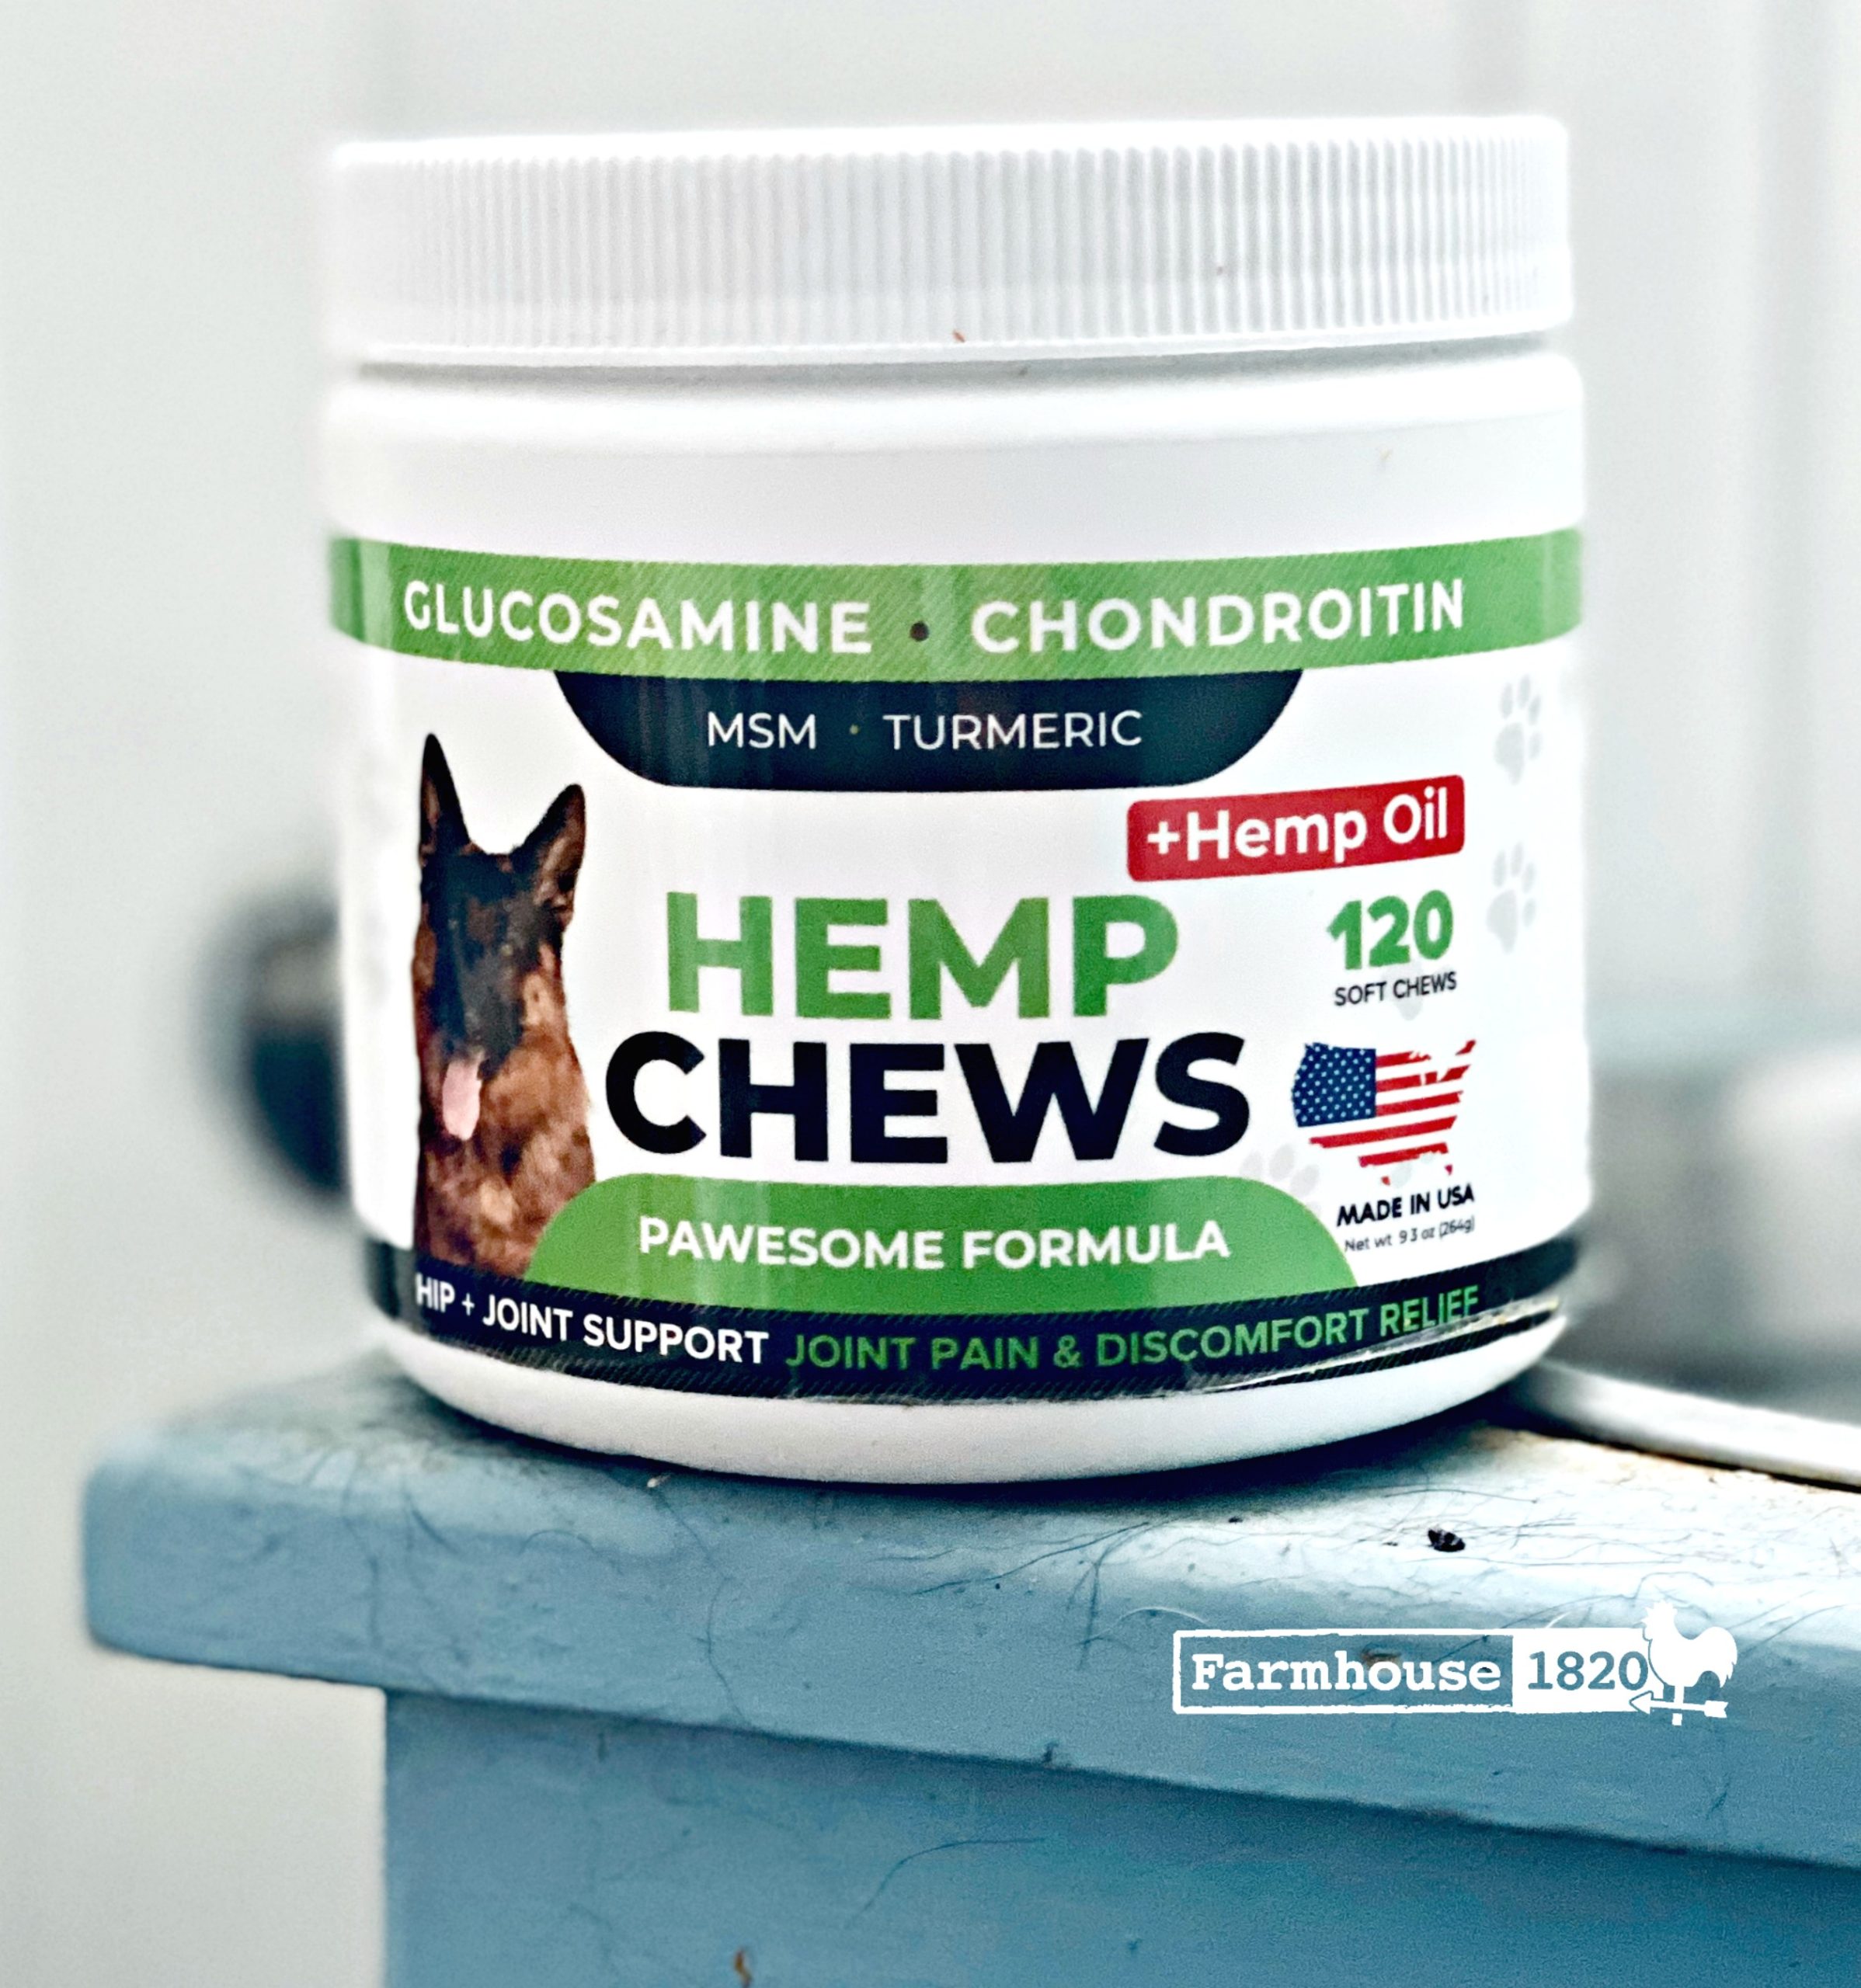 click here for hemp chews link.